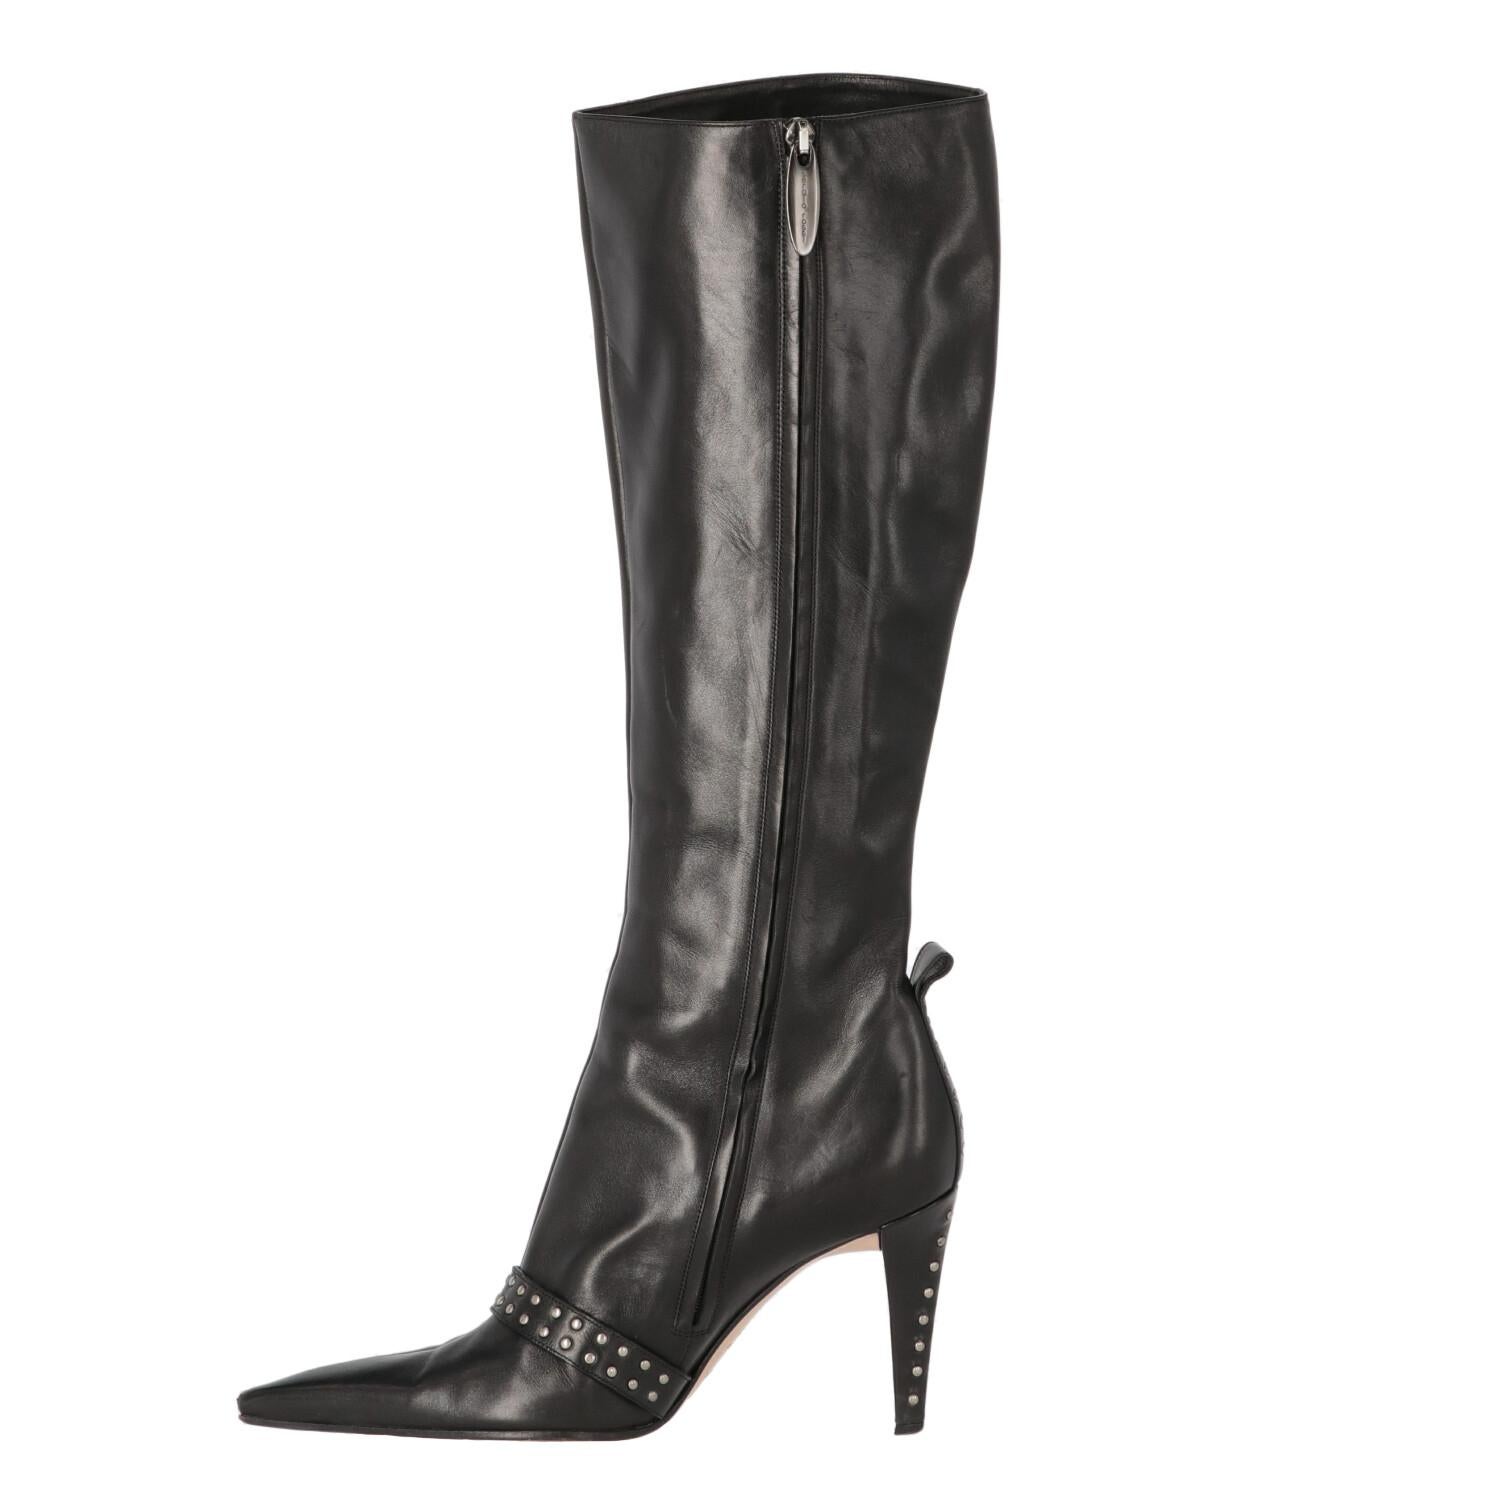 Sergio Rossi black leather heeled boots with decorative silver metal studs. Pointed model and knee height

The item shows some some wrinkles and signs of wear on the leather, as shown in the pictures.
Years: 2000s

Made in Italy

Size: 38 EU

Heel: